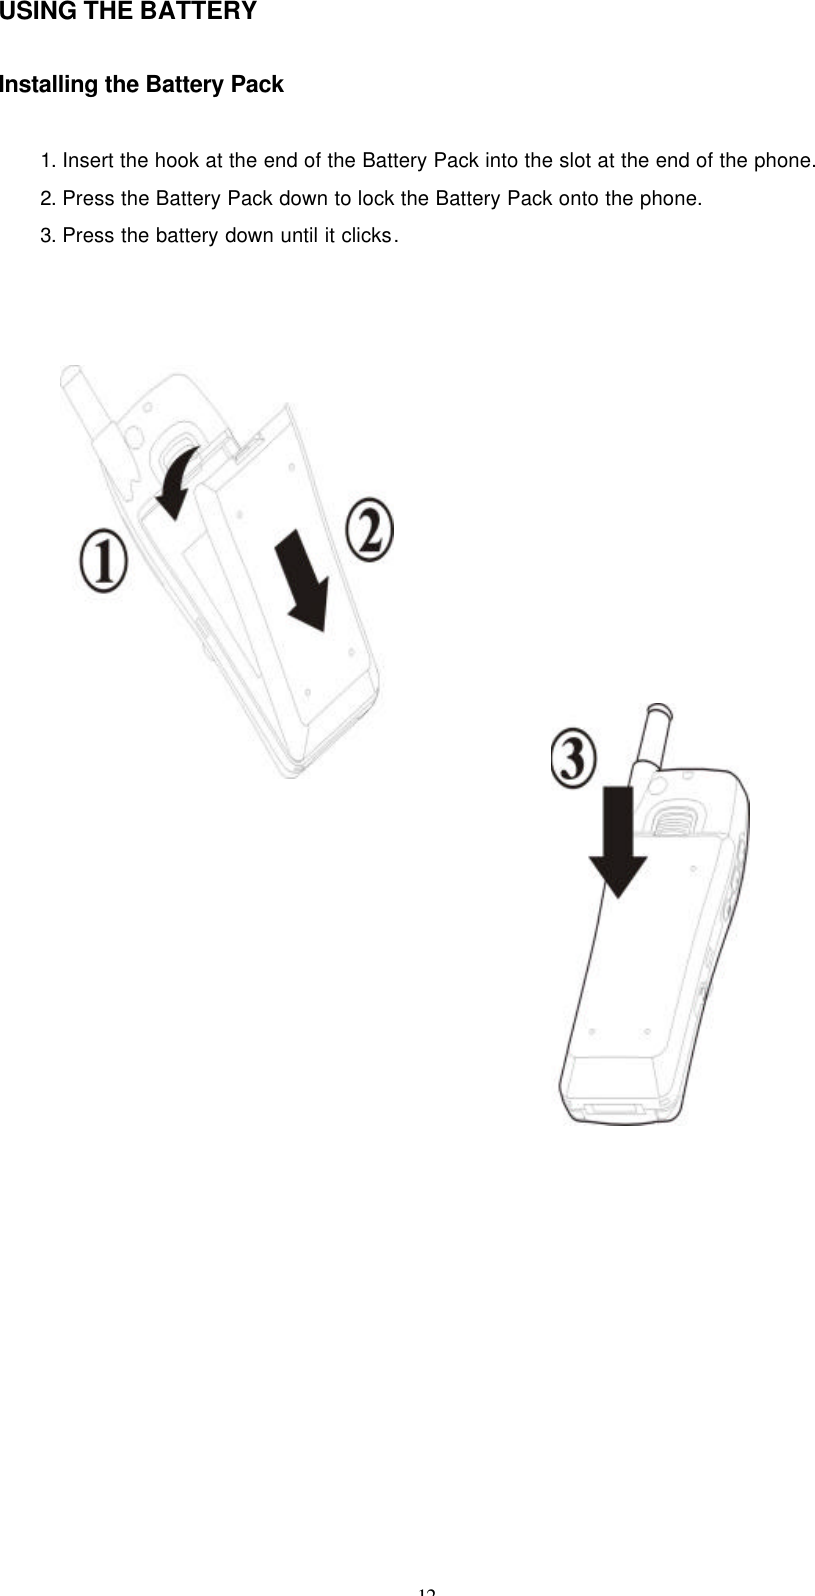 12 USING THE BATTERY    Installing the Battery Pack  1. Insert the hook at the end of the Battery Pack into the slot at the end of the phone. 2. Press the Battery Pack down to lock the Battery Pack onto the phone. 3. Press the battery down until it clicks.                                                     